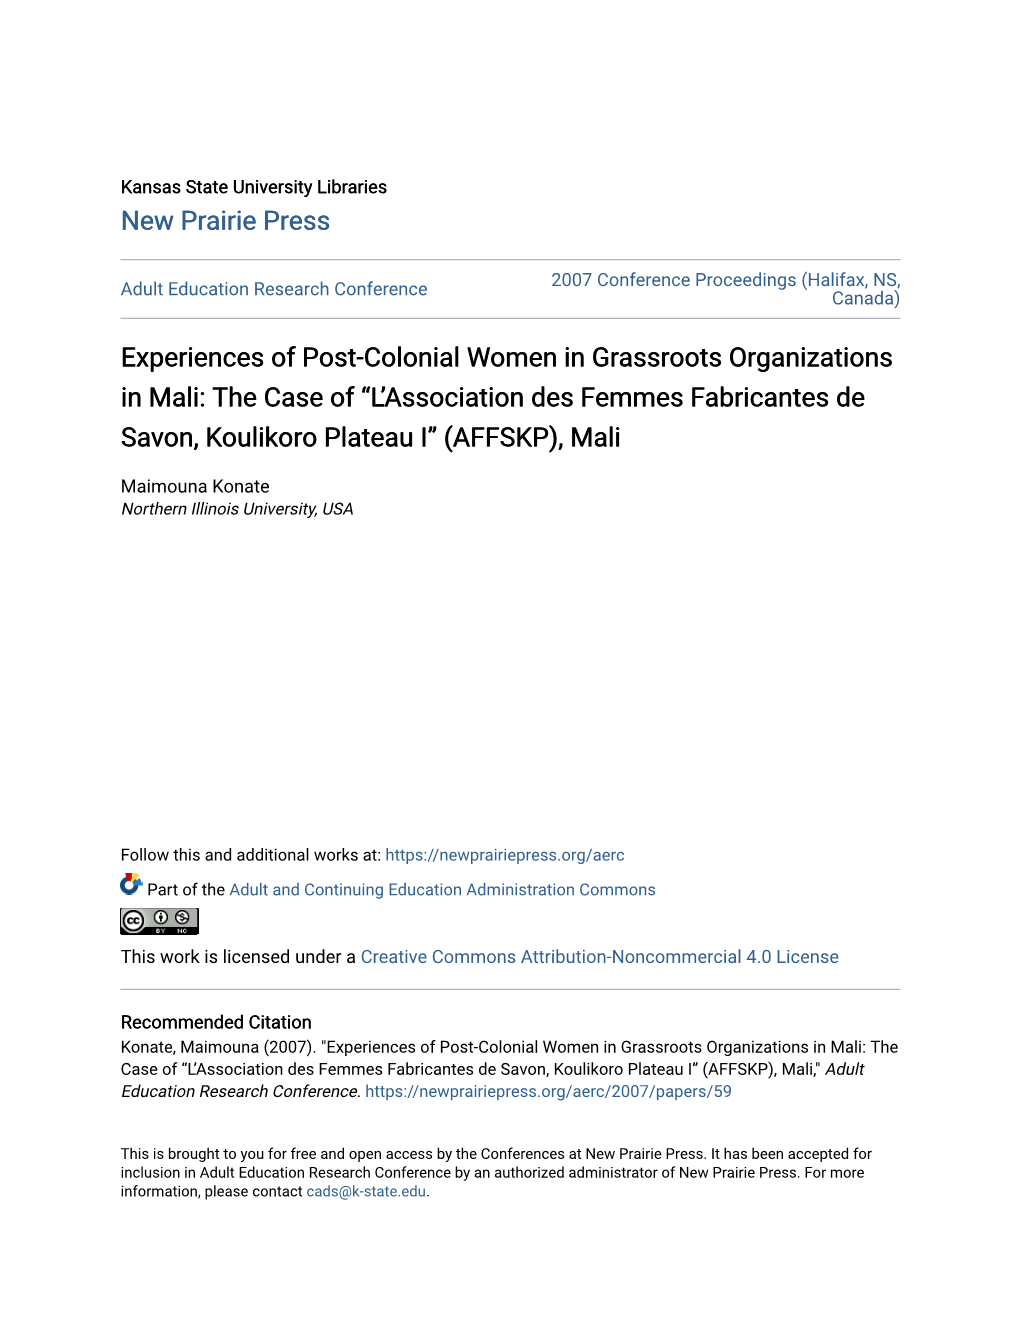 Experiences of Post-Colonial Women in Grassroots